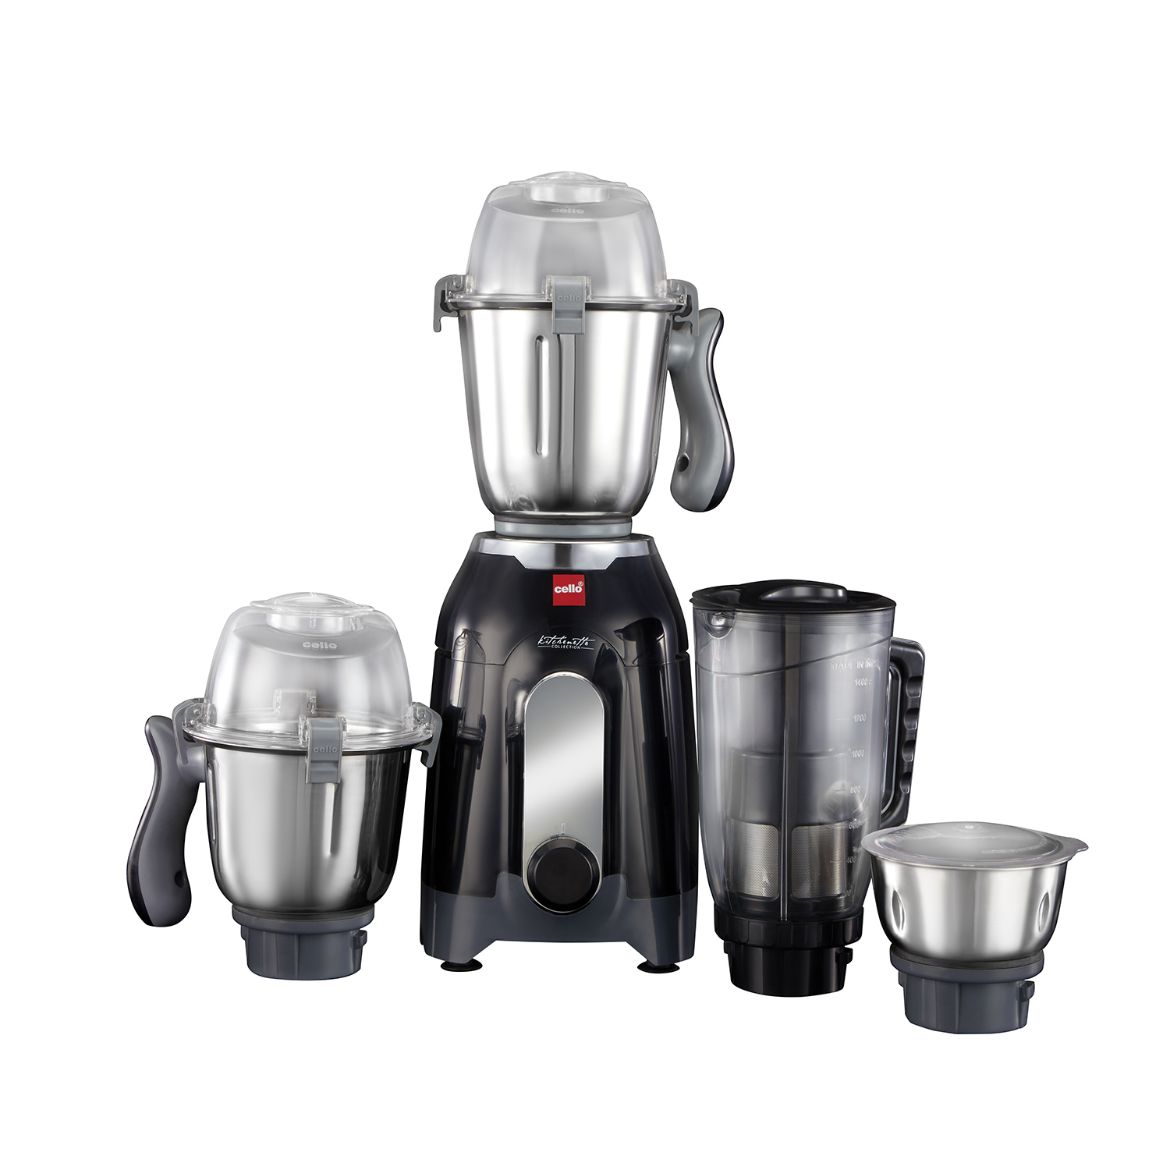 Discovery Pro Juicer Mixer Grinder with 4 Jars, 750W Black / 750 Watts